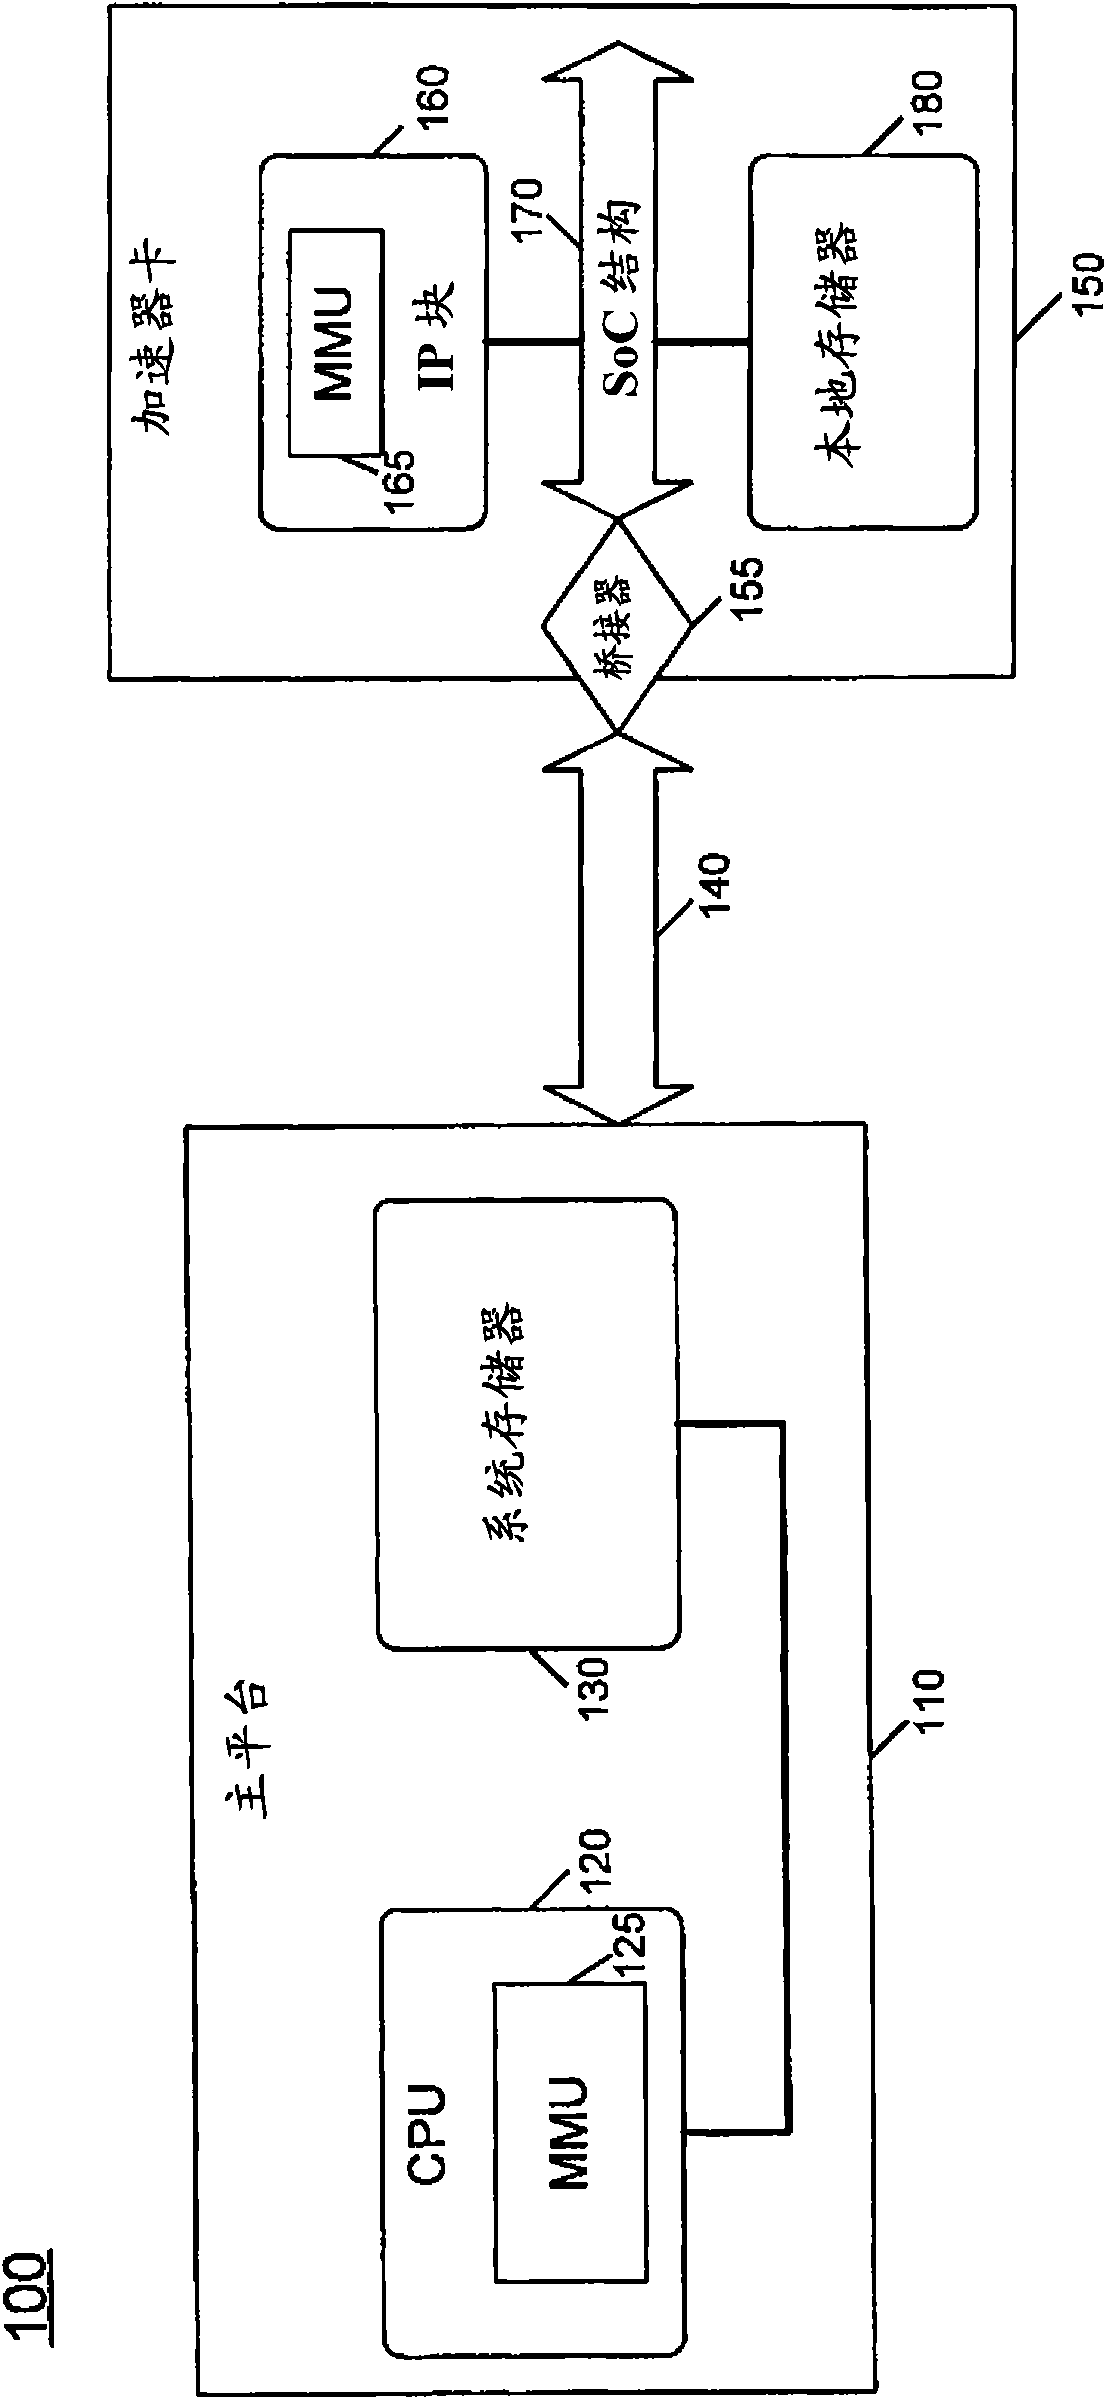 Providing hardware support for shared virtual memory between local and remote physical memory